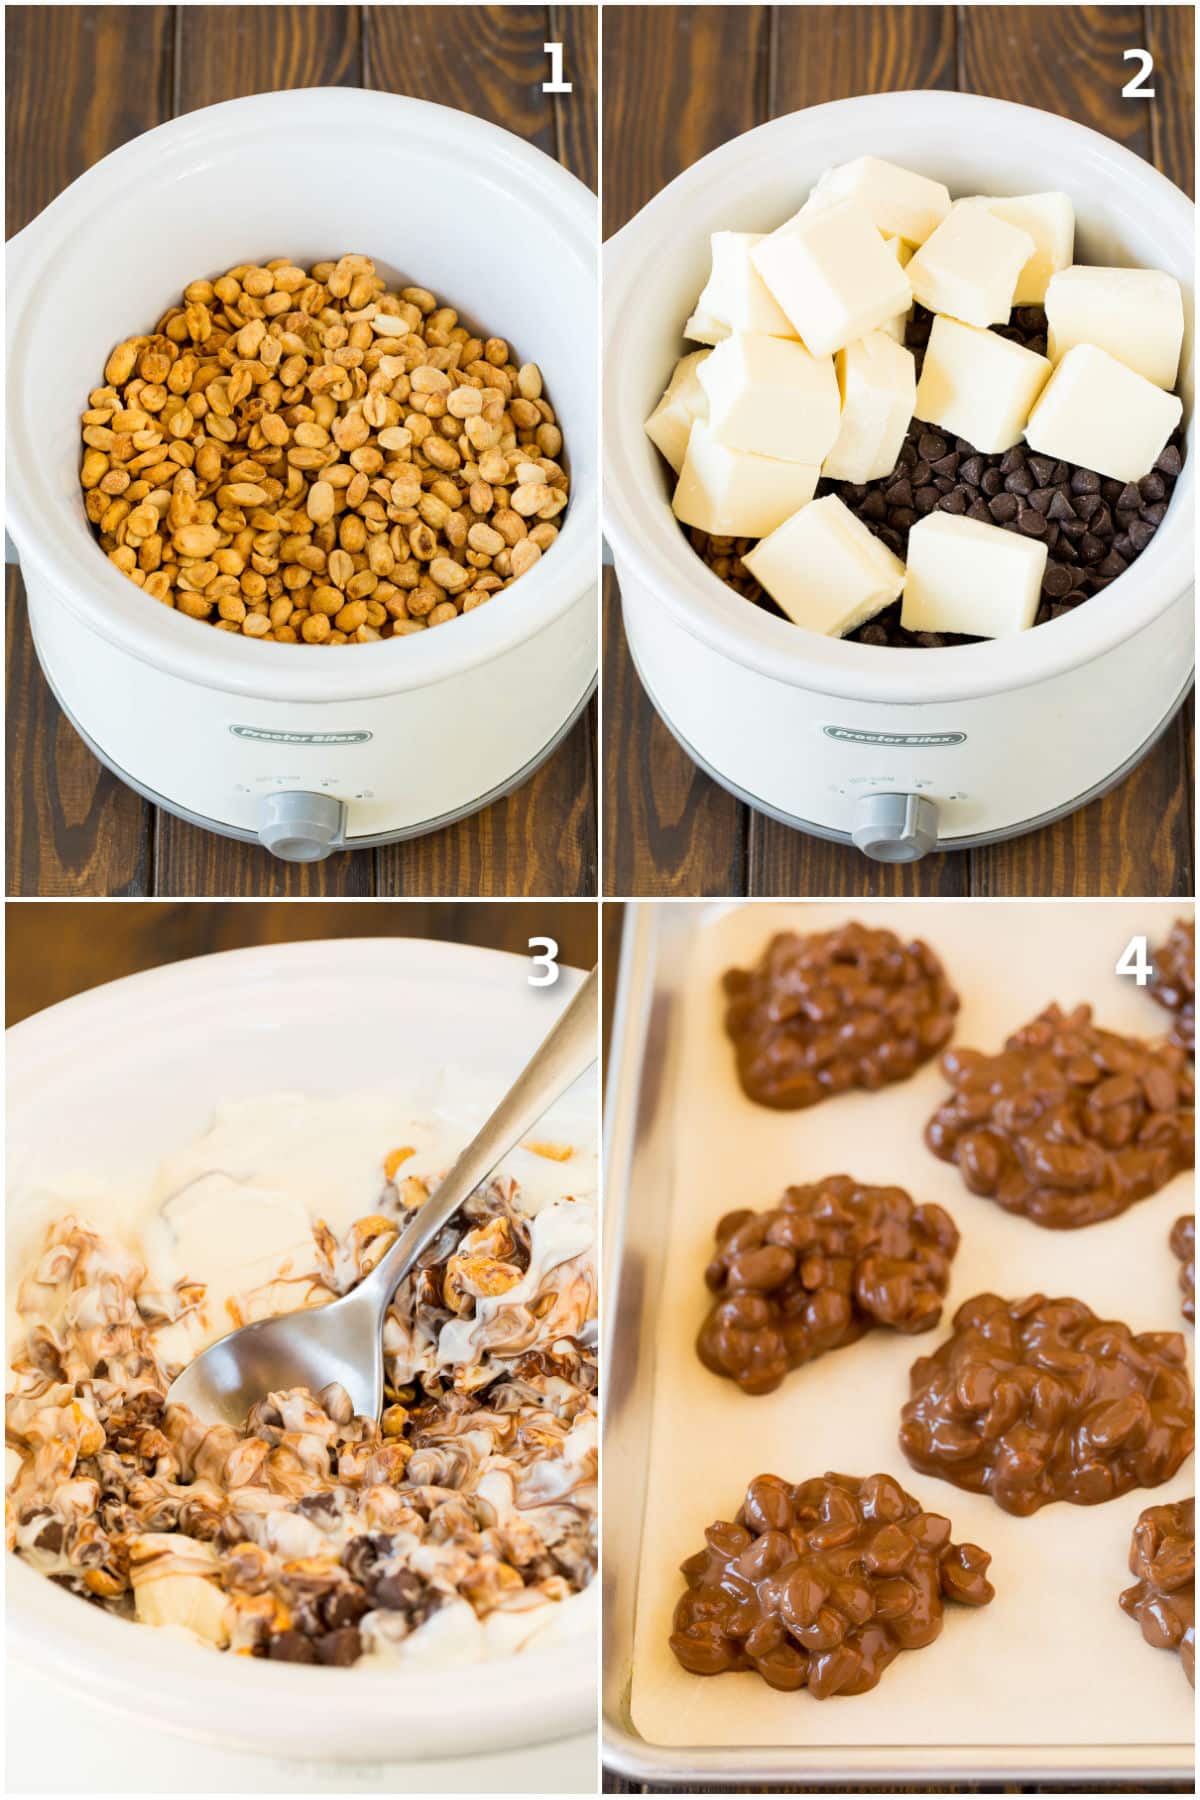 Step by step process shots showing how to make crock pot candy.